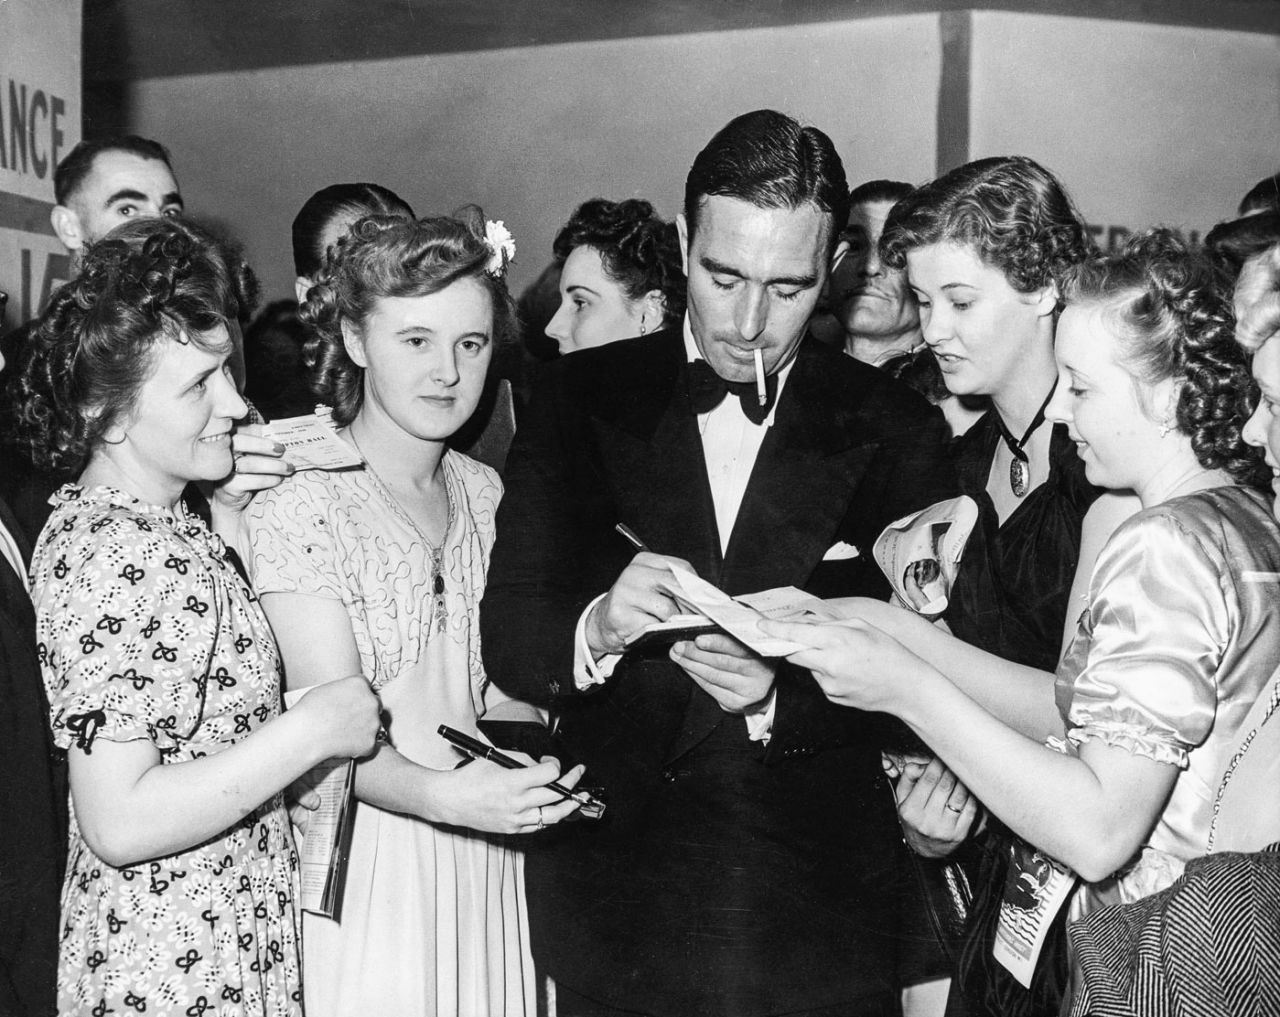 Denis Compton signs autographs for his fans at Empress Hall, London